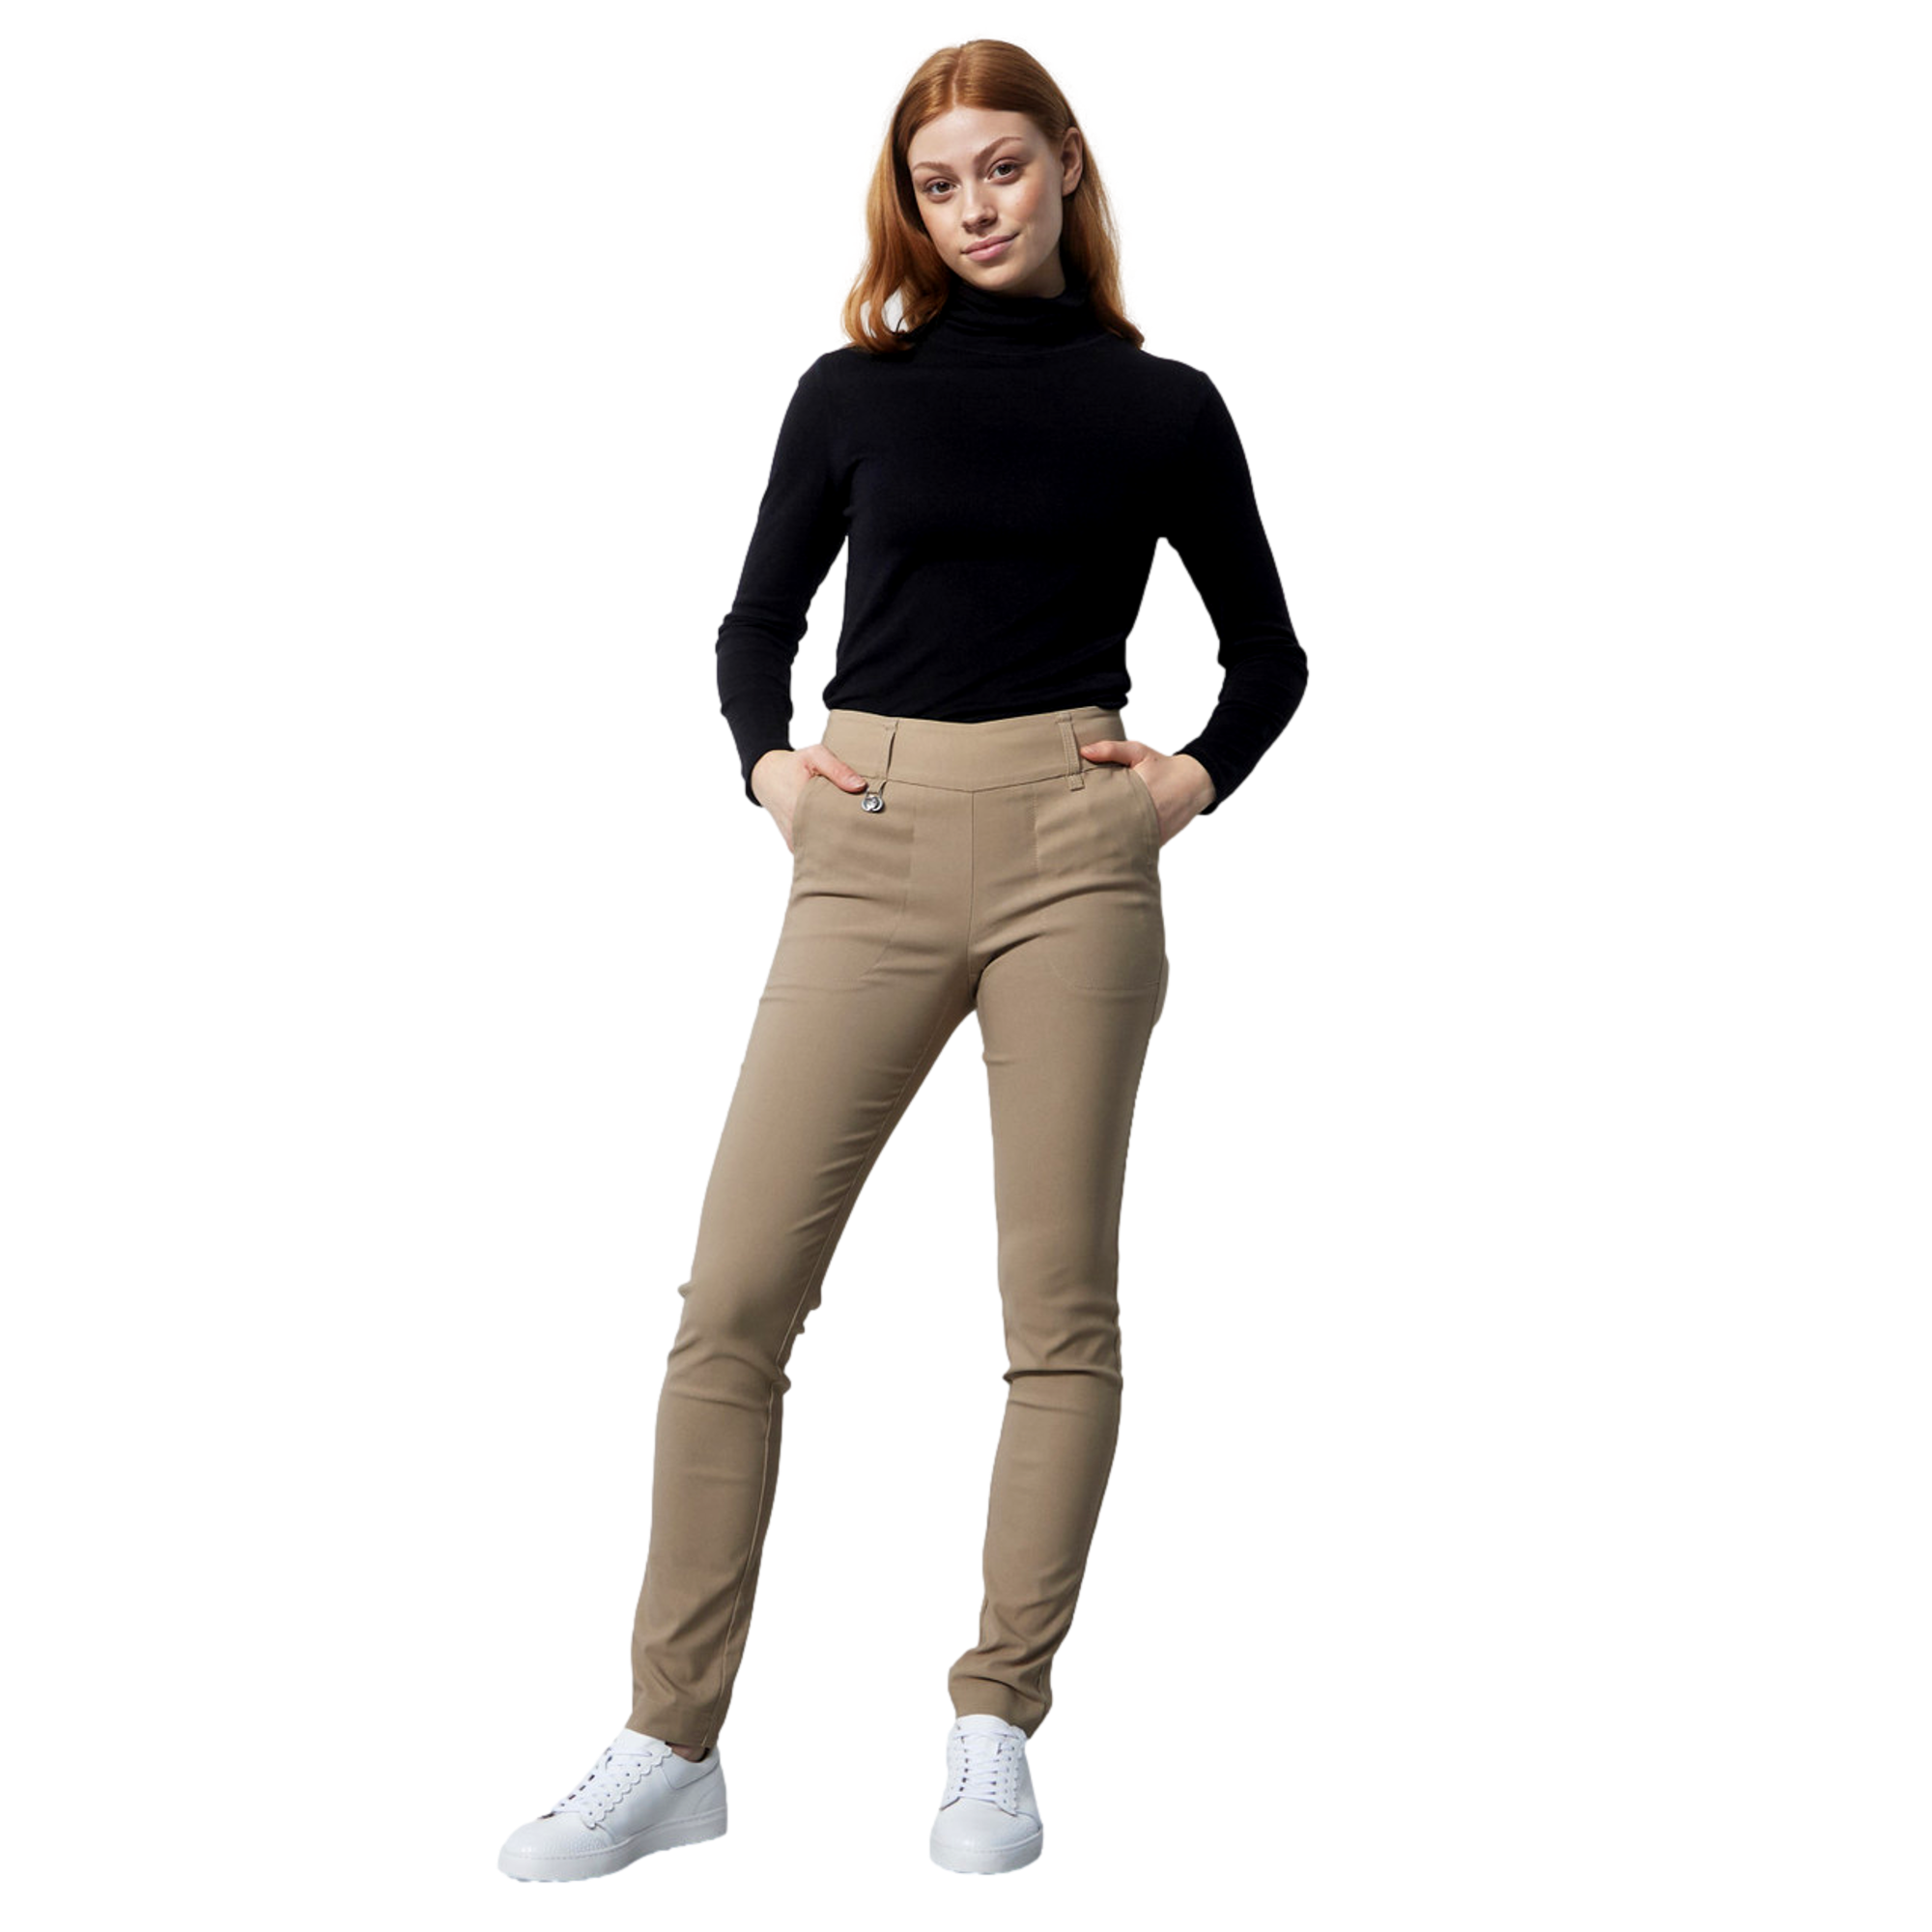 Daily Sports Magic Warm 29 Inch - Trousers